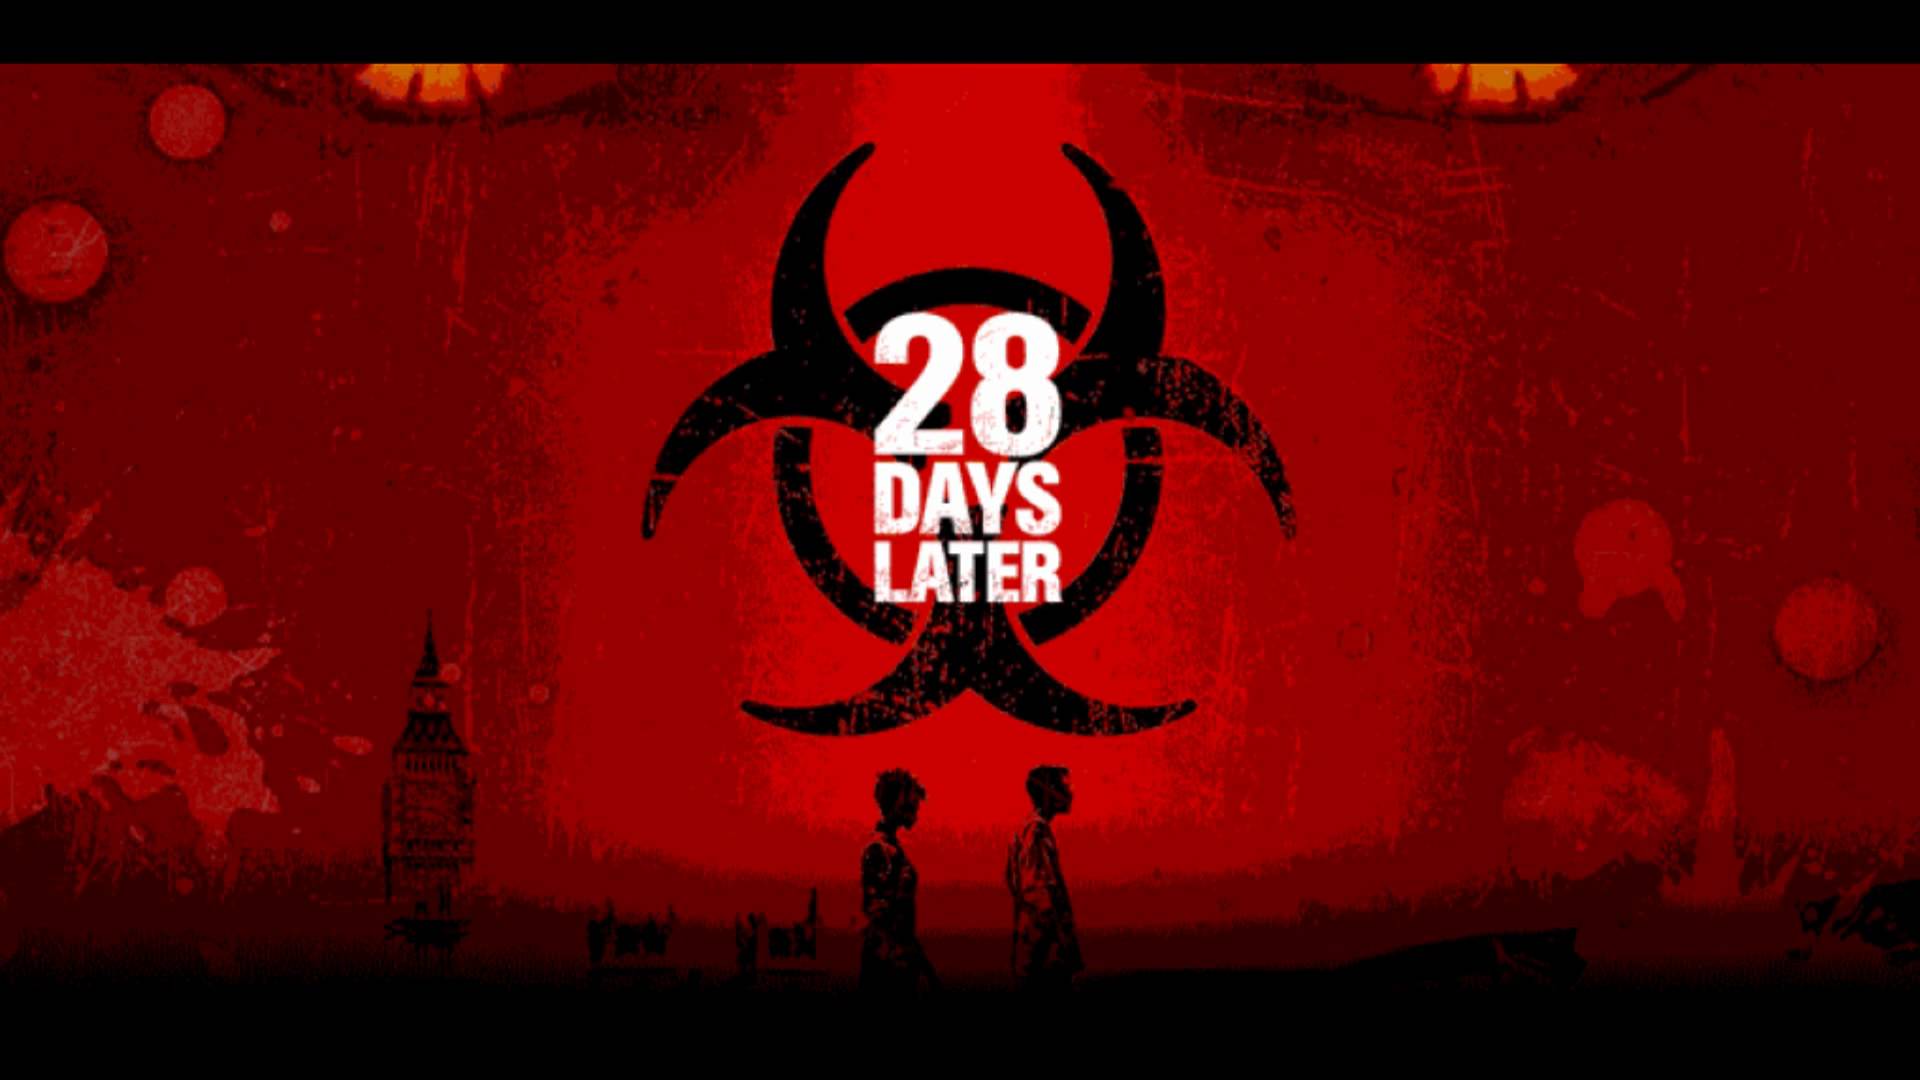 actress in 28 days later movie poster